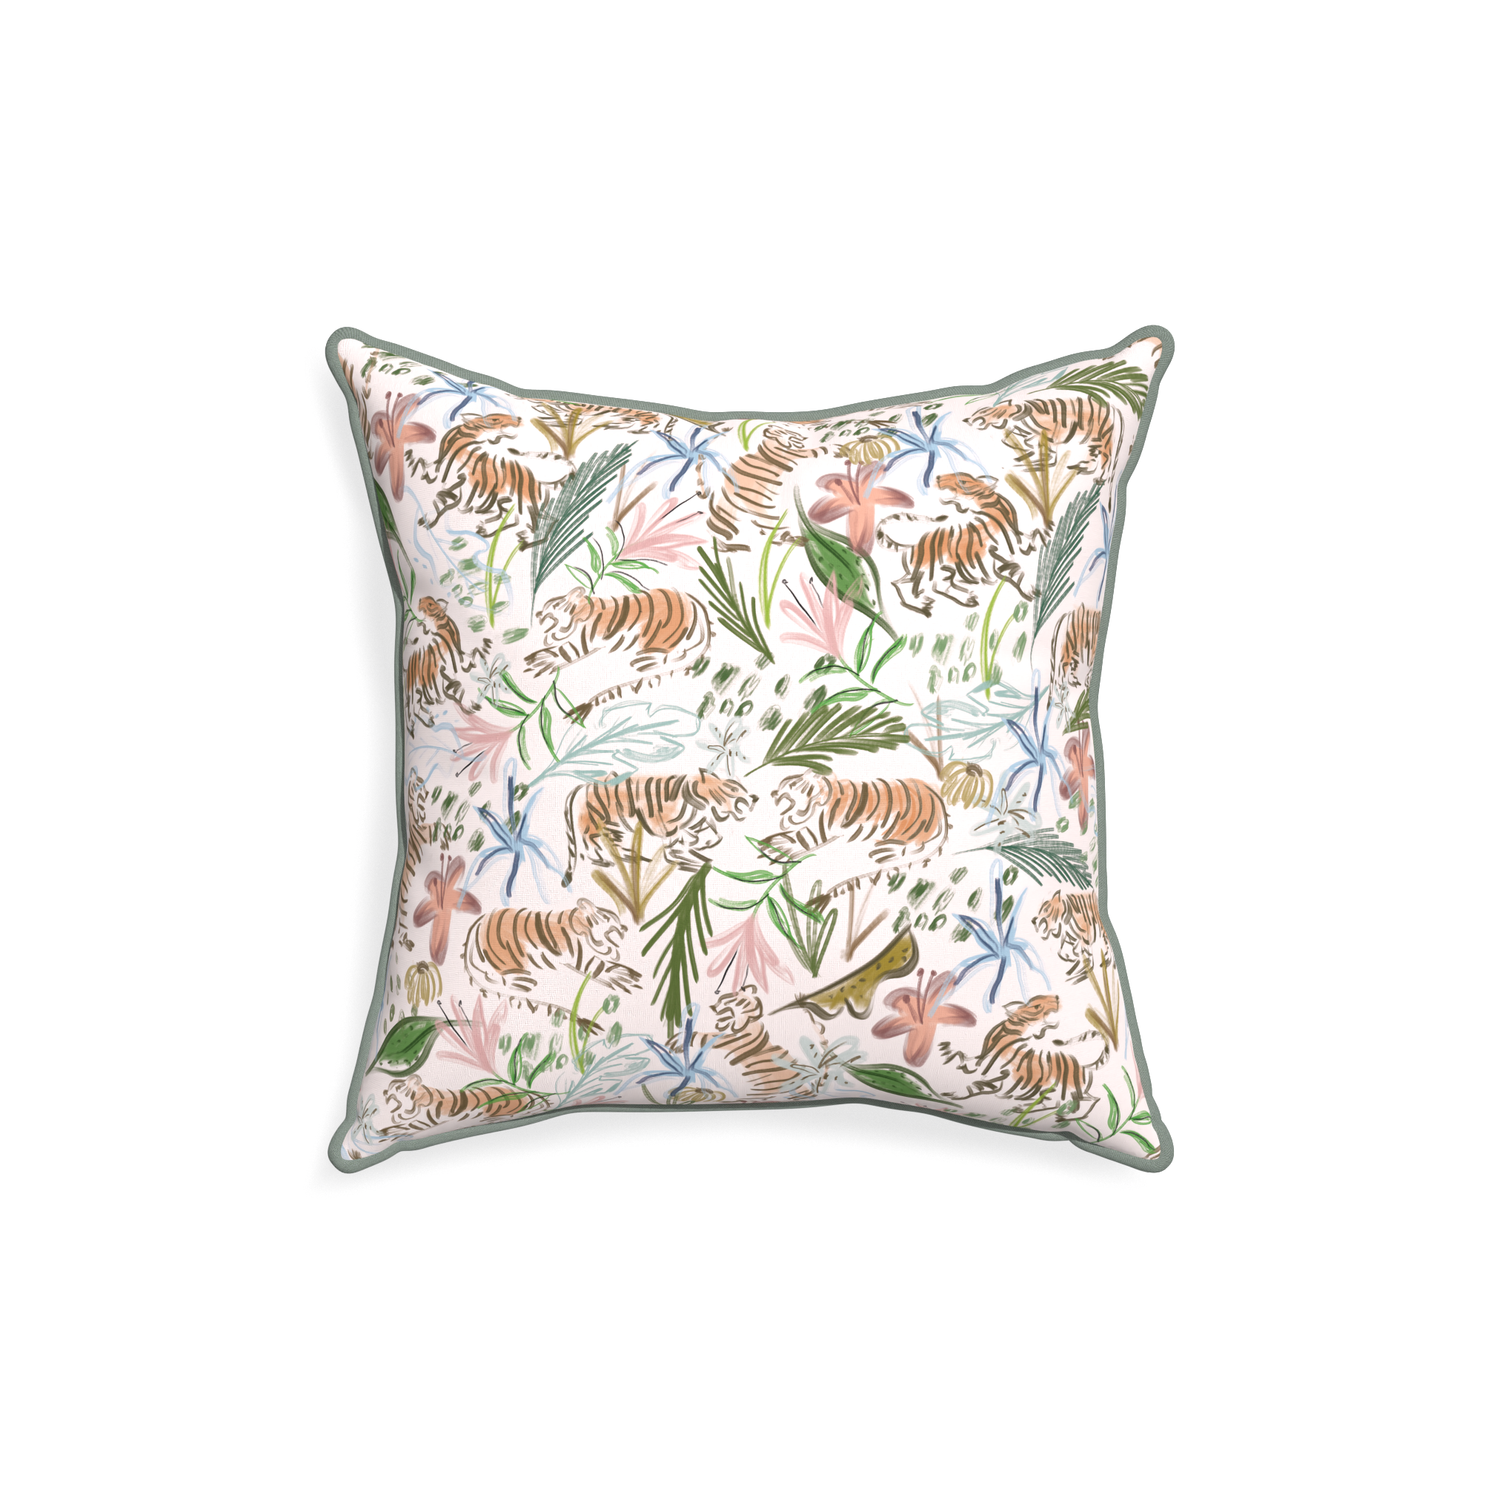 18-square frida pink custom pink chinoiserie tigerpillow with sage piping on white background